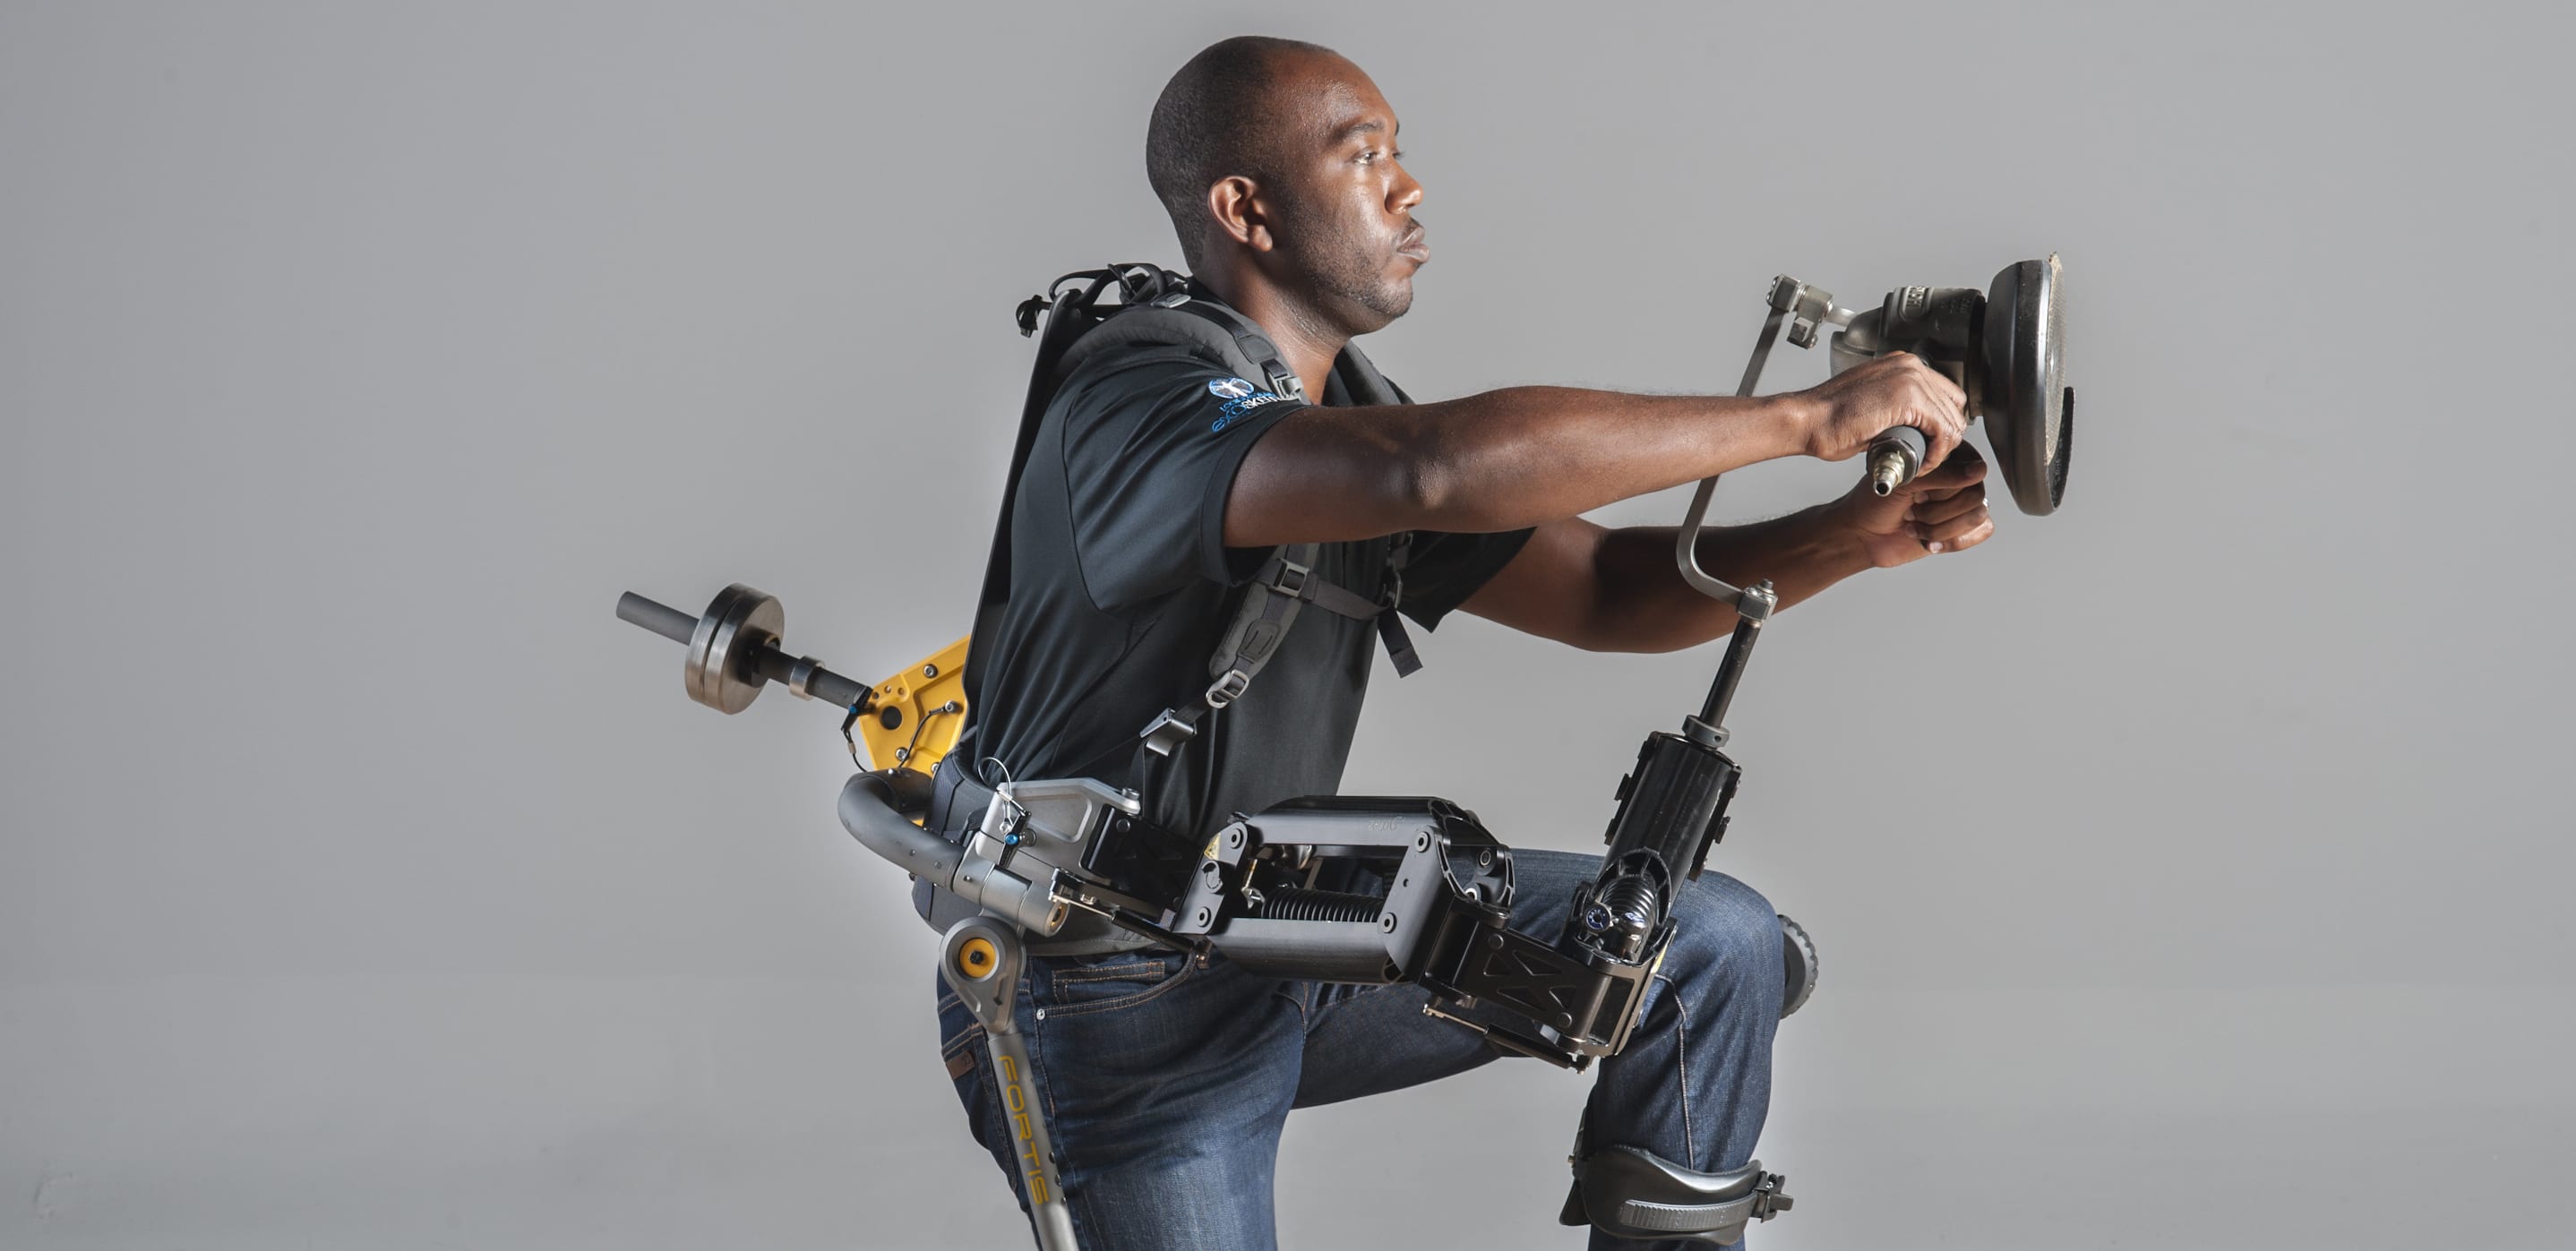 These 4 Bionic Suits Turn Human Technicians Into Iron Man